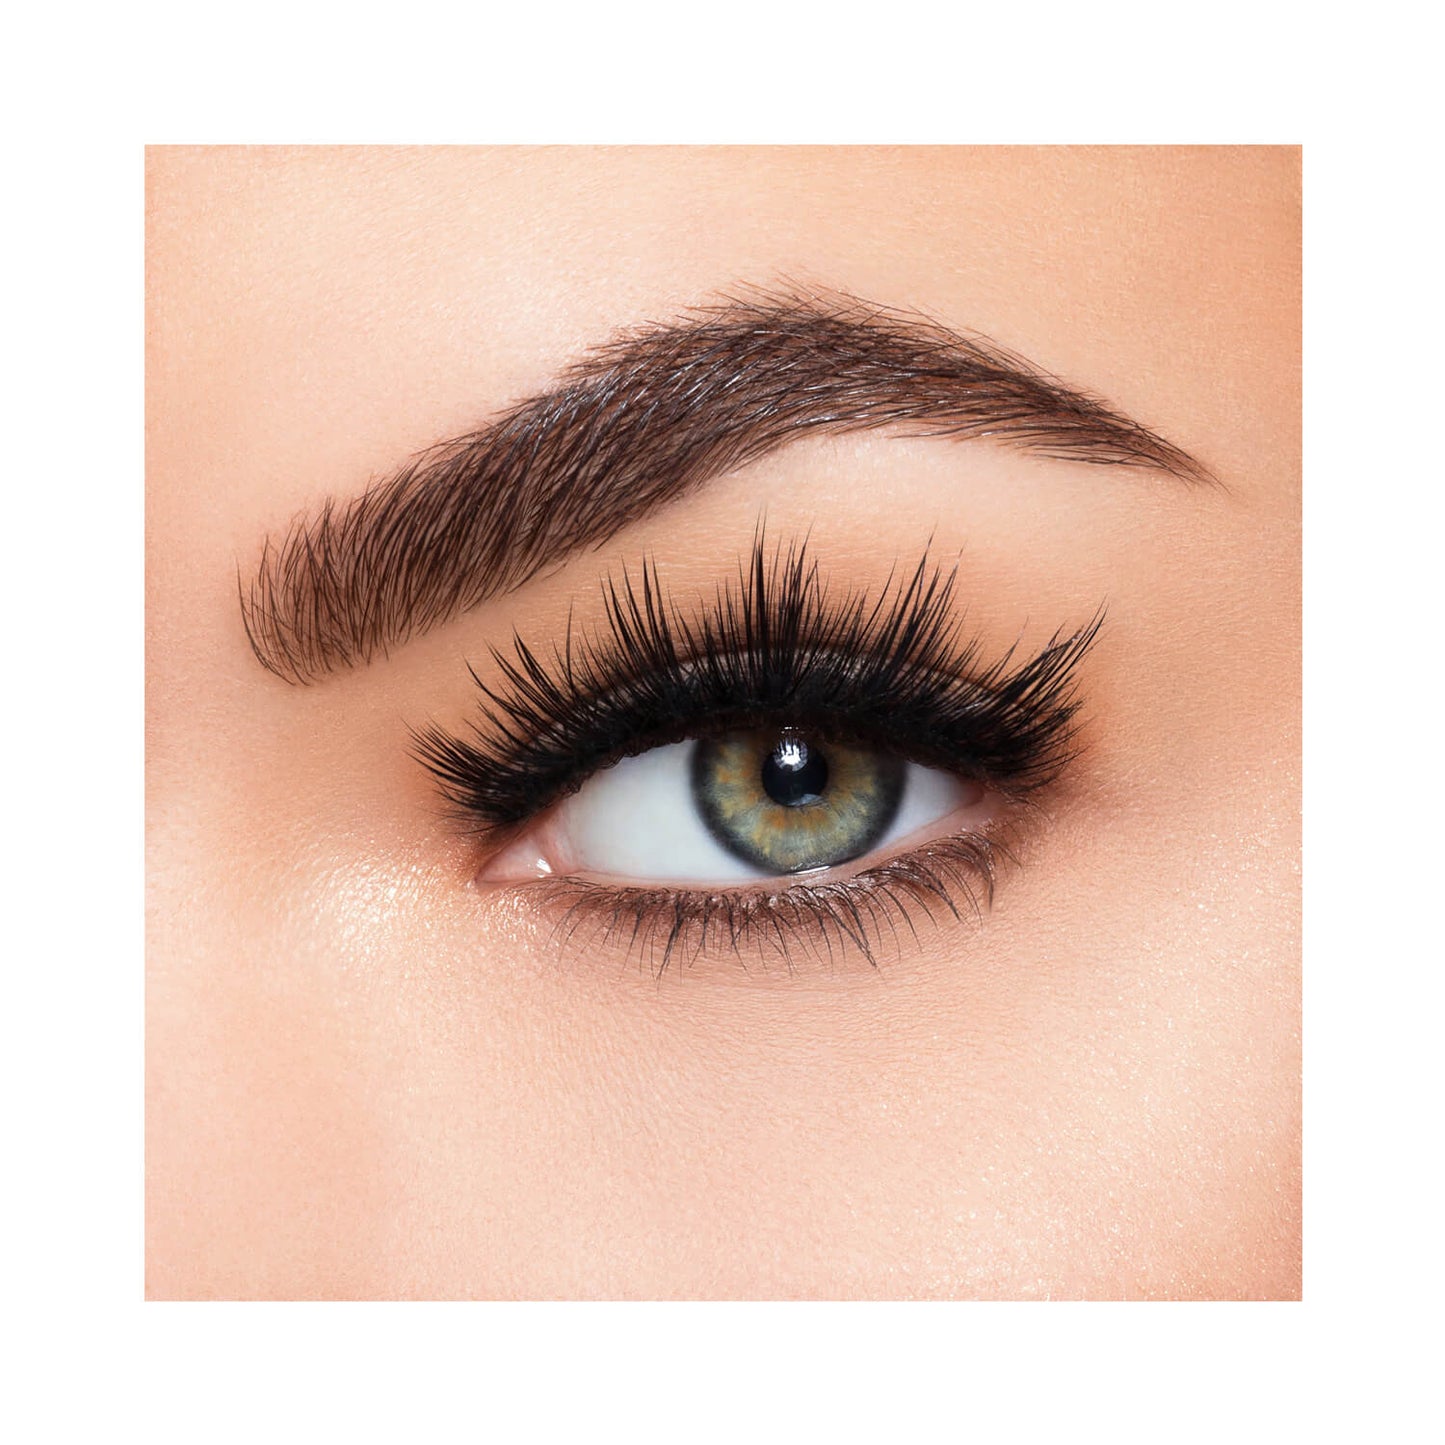 Lilly Lashes Tease Luxury Mink Lashes